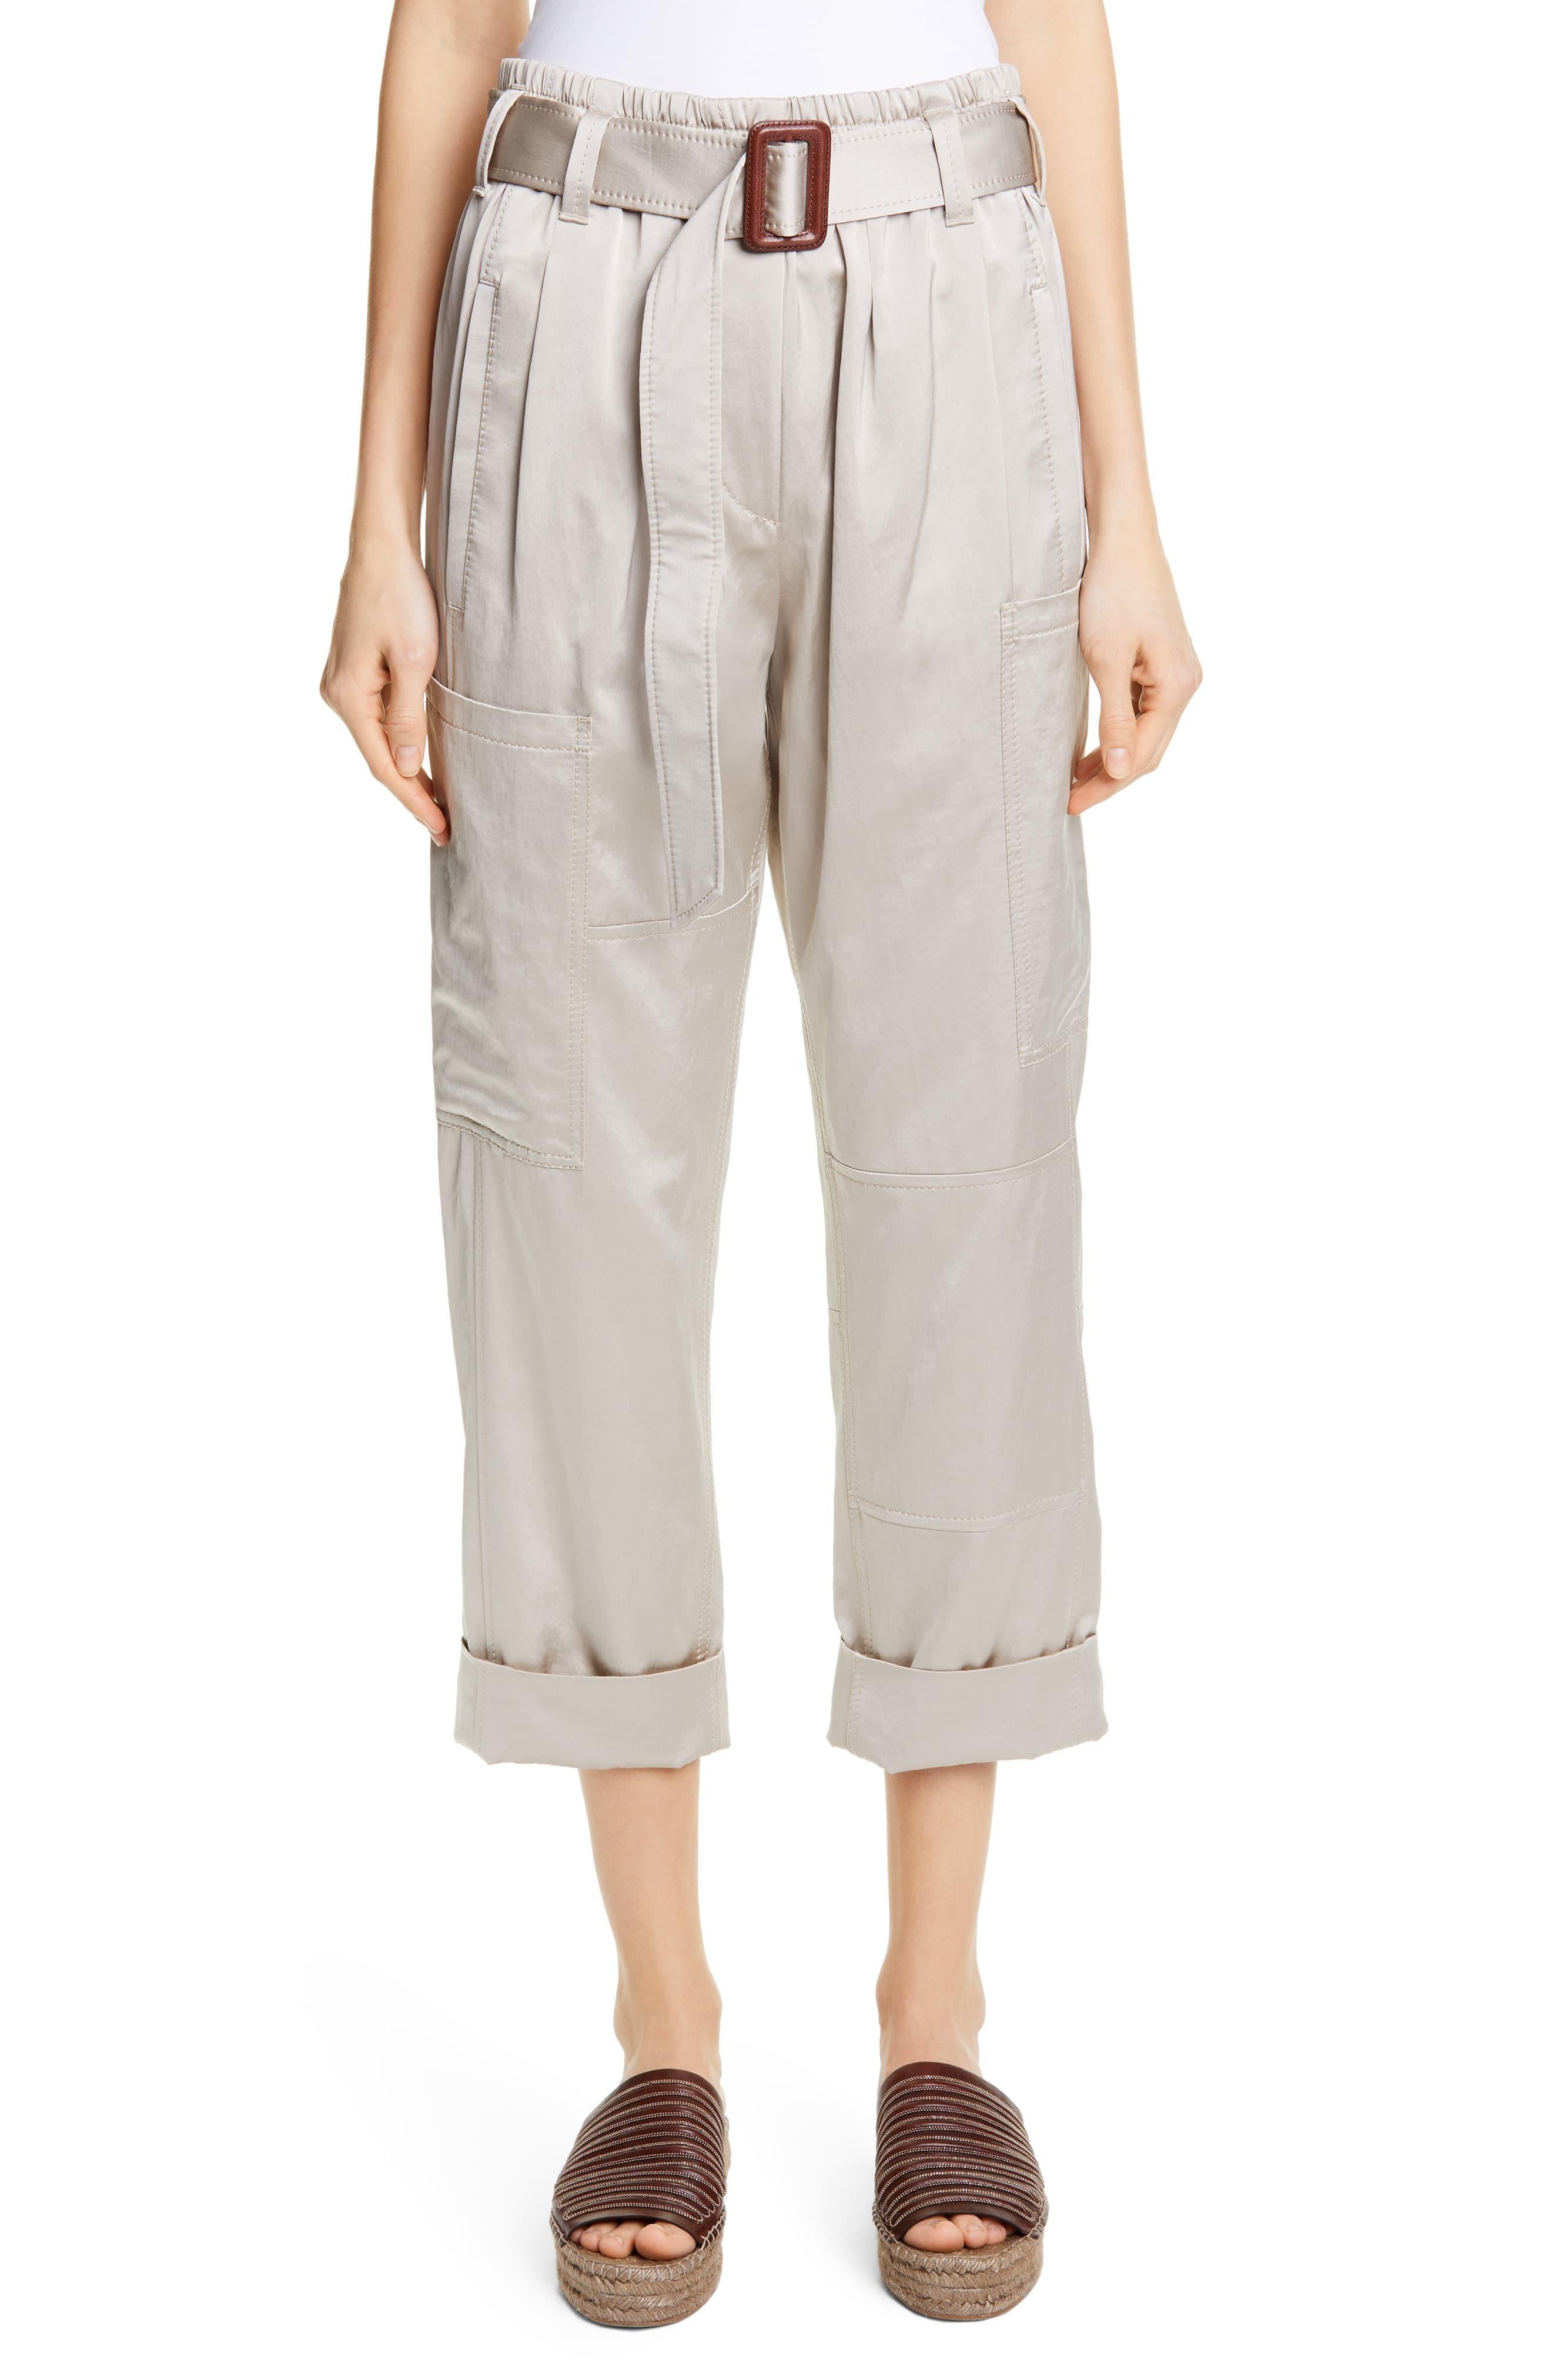 Brunello Cucinelli Belted Satin Cargo Pants in Gray - Lyst